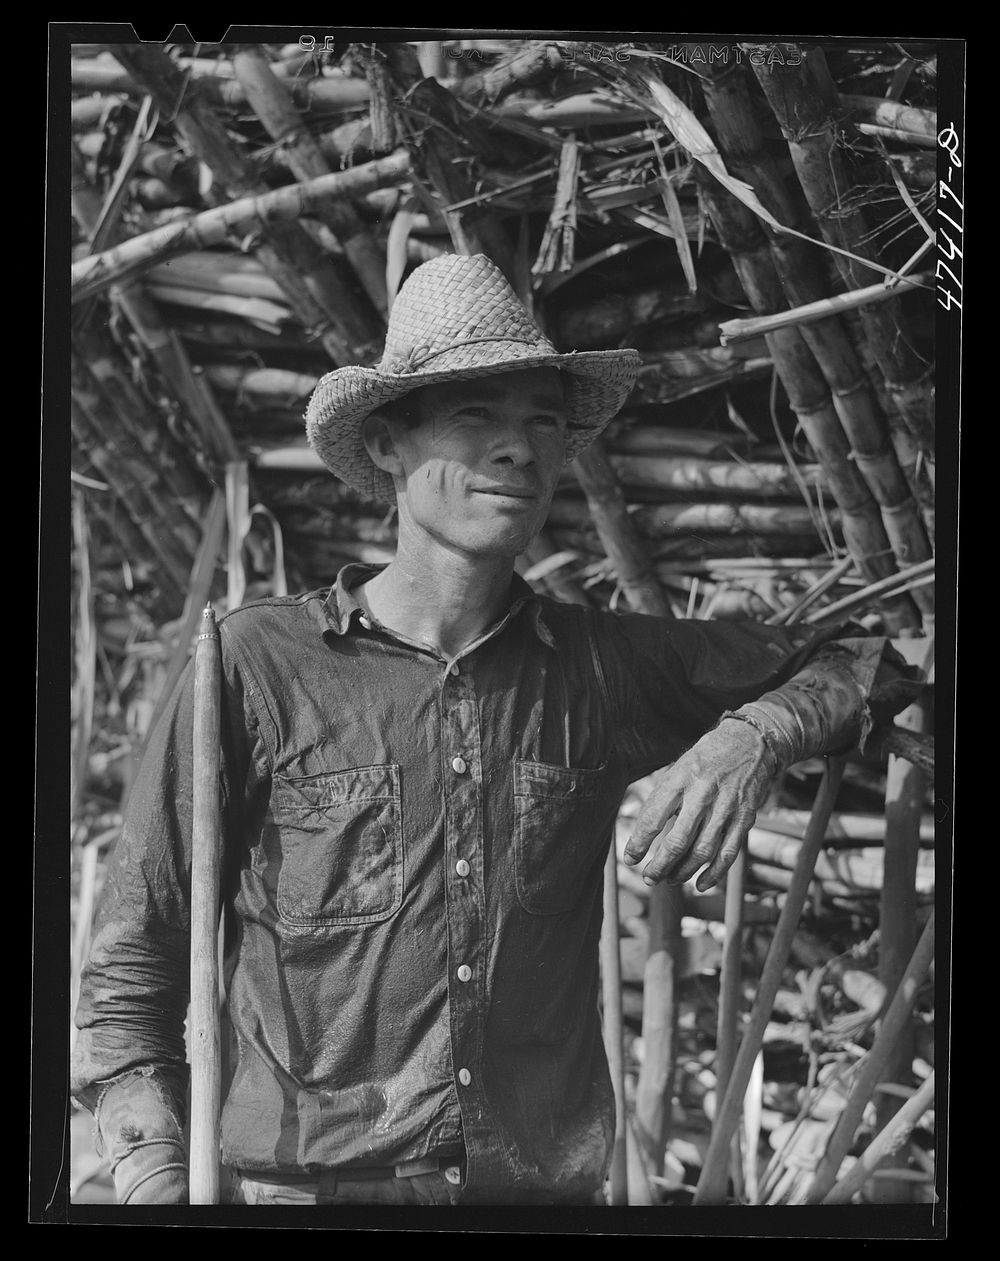 Guanica, Puerto Rico (vicinity). Ox-cart driver who was working in a sugar cane field. Sourced from the Library of Congress.